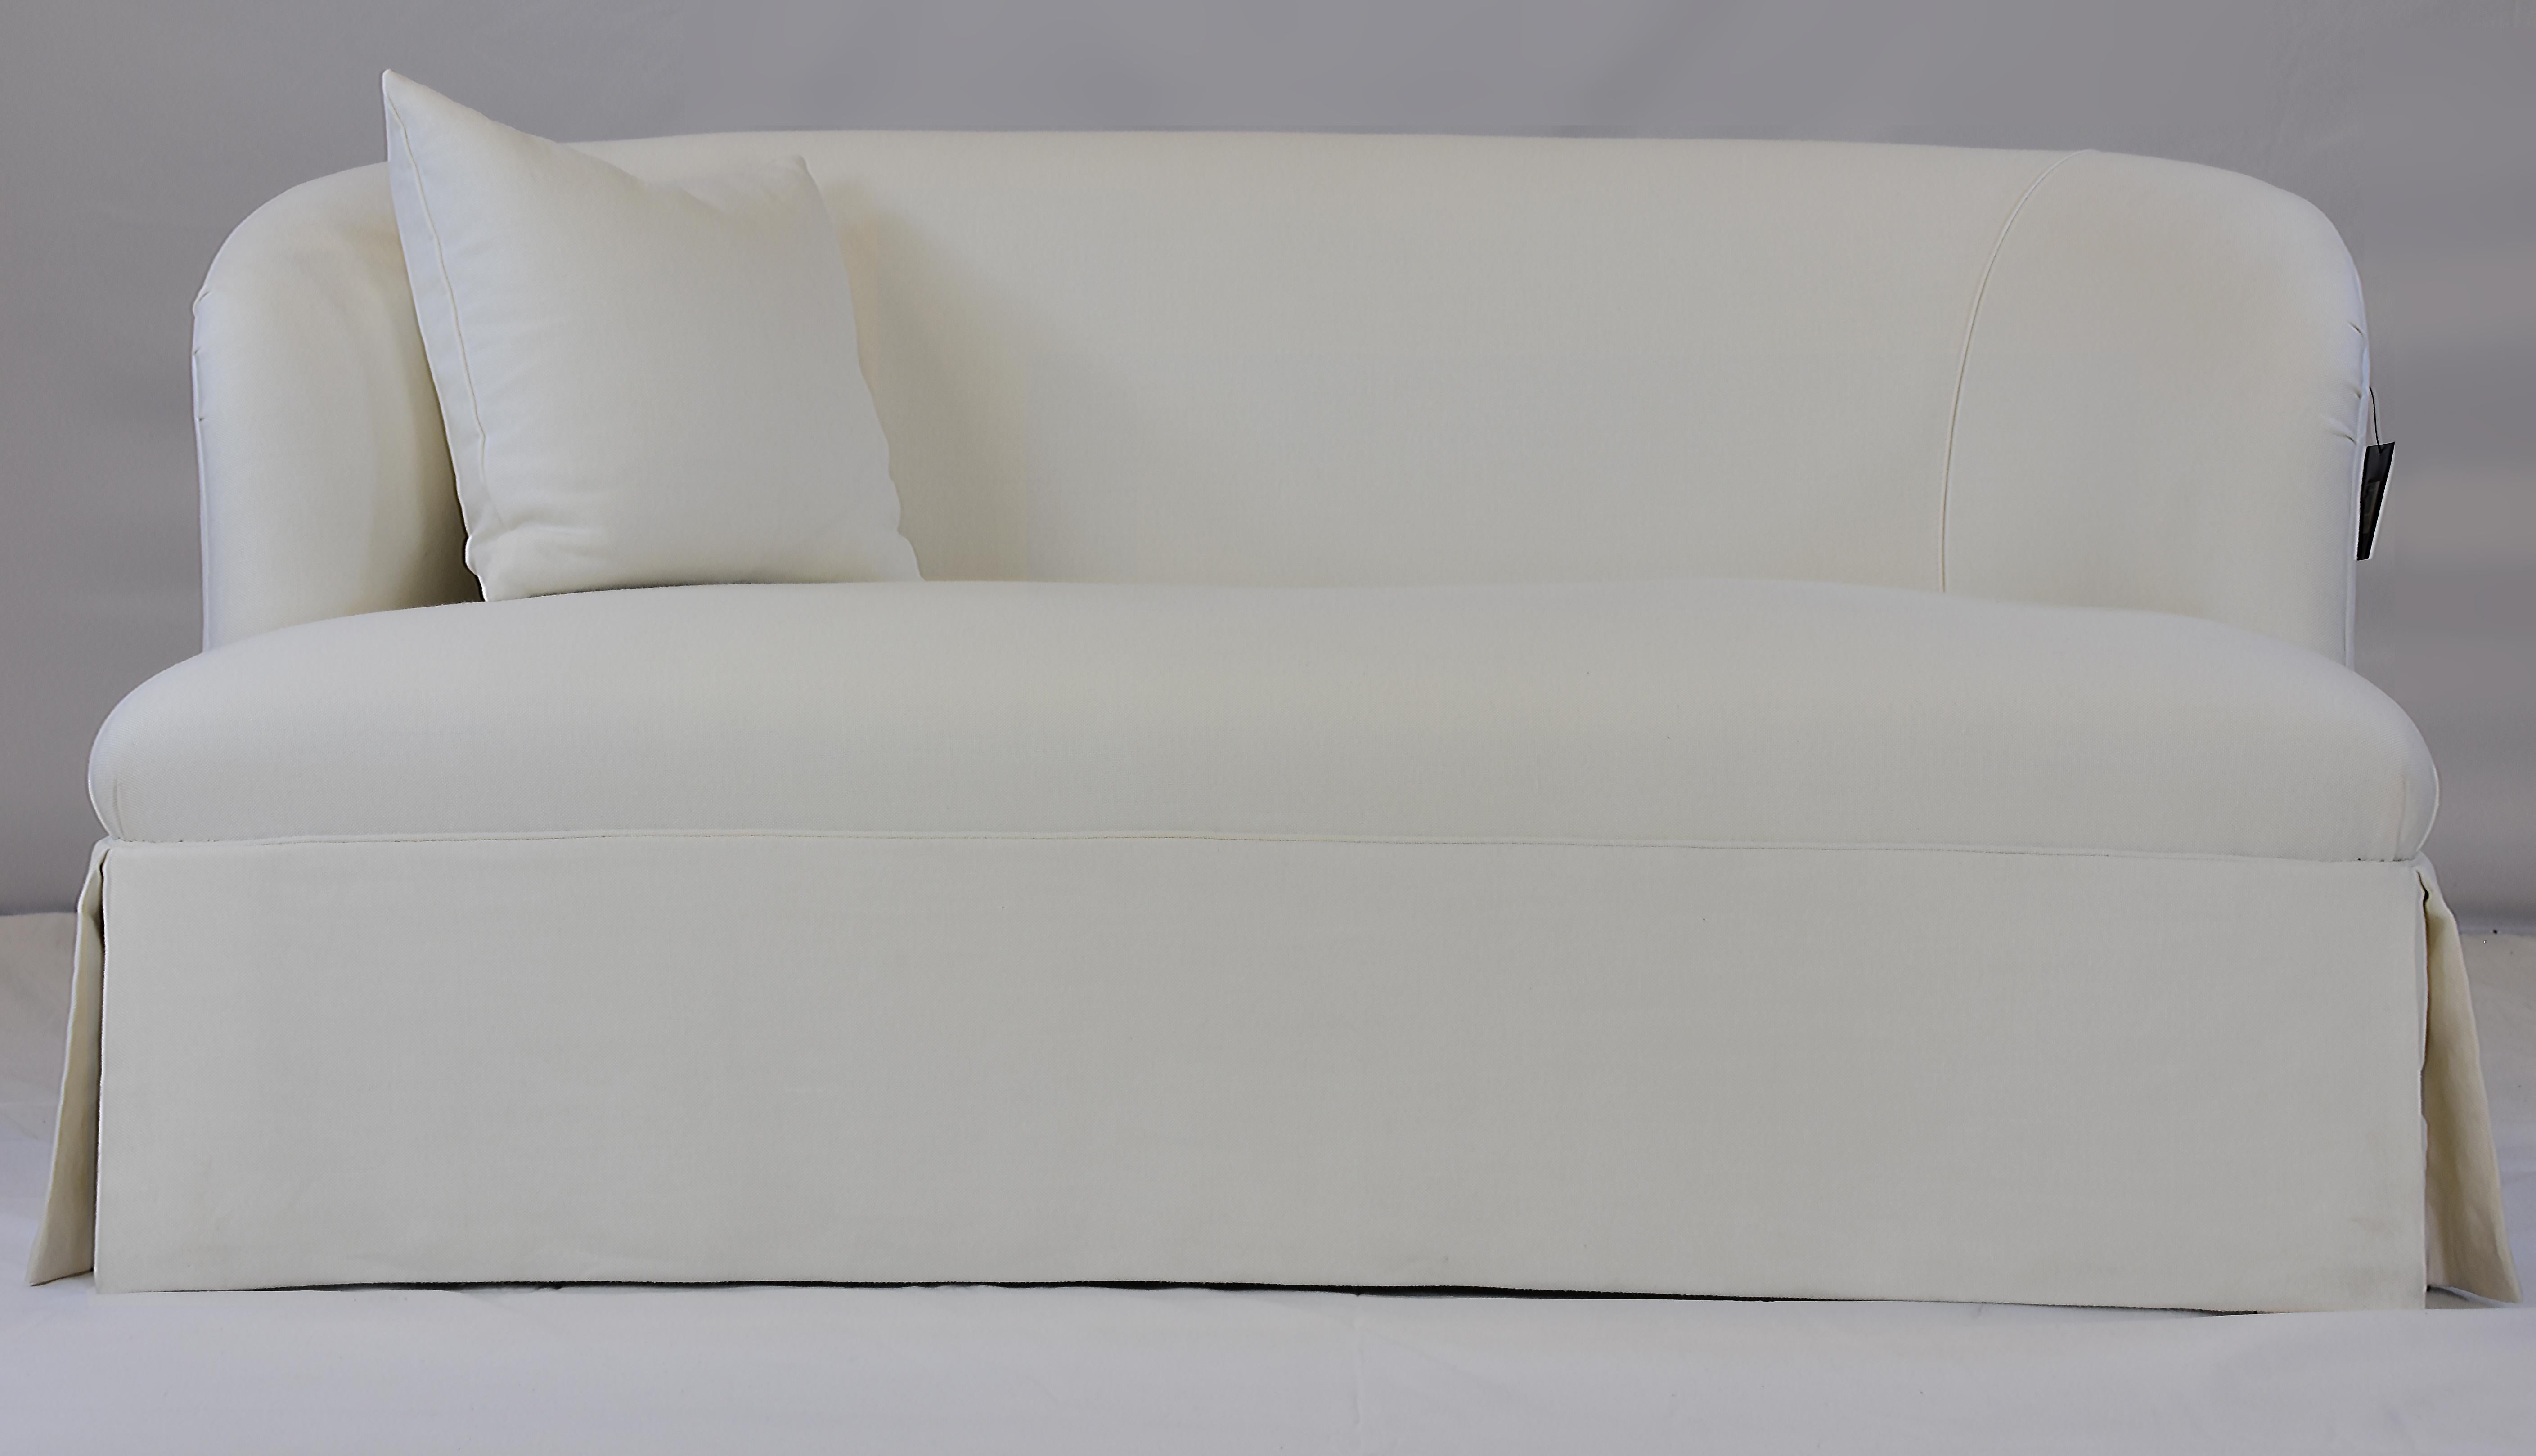 Contemporary Le Jeune Upholstery St Tropez 2-Seat Sofa Showroom Model For Sale